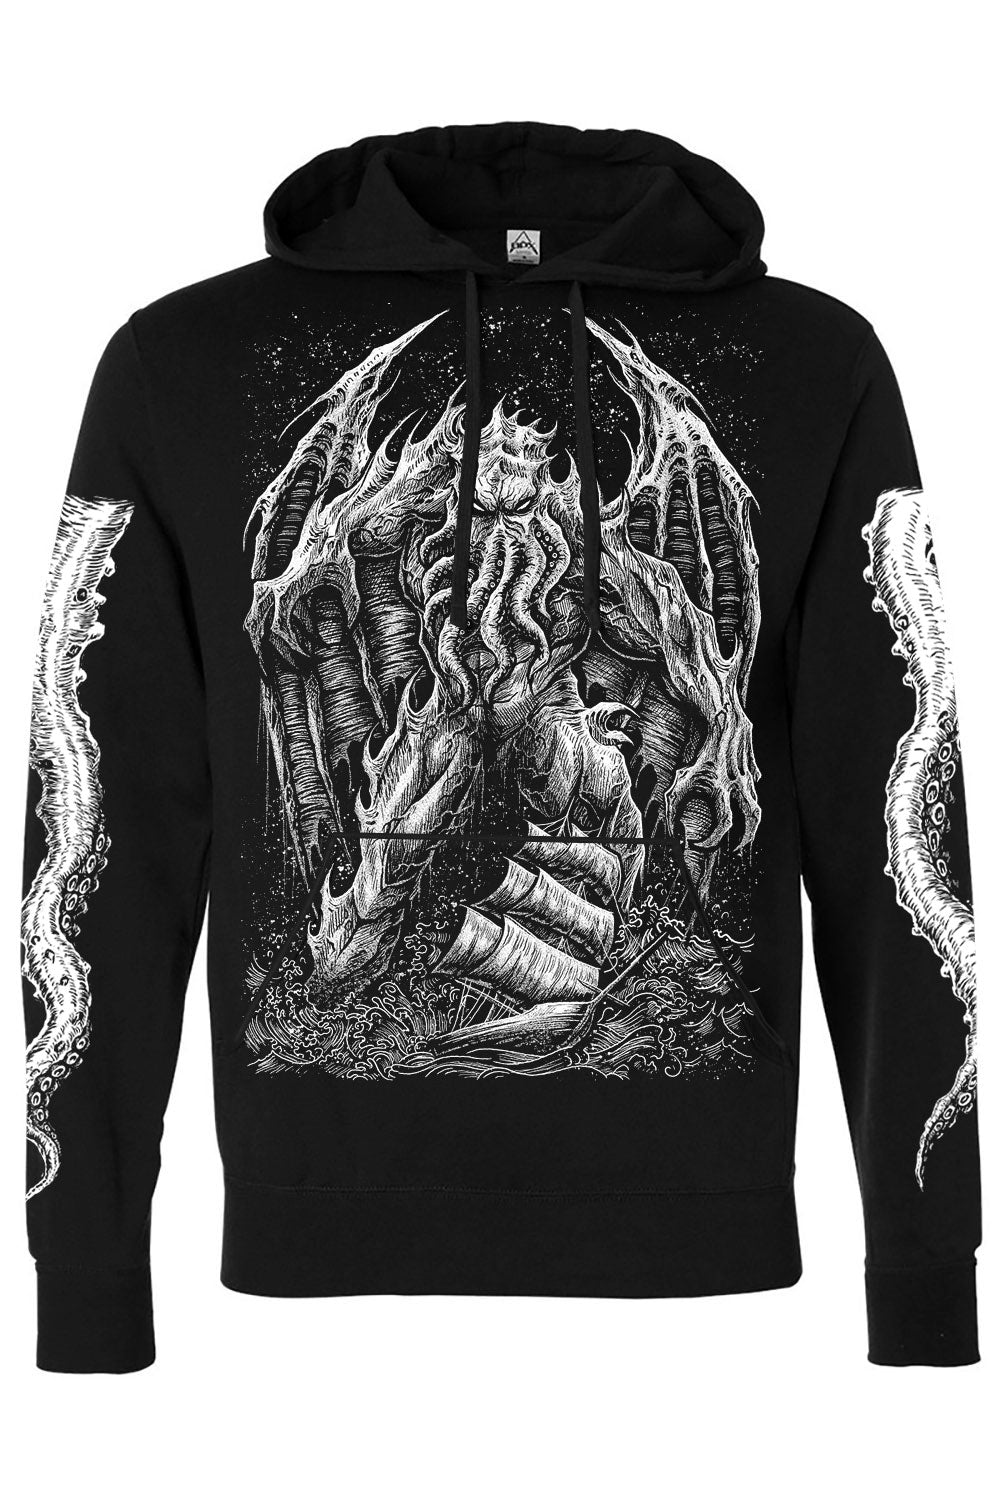 gothic Cthulhu monster hoodie